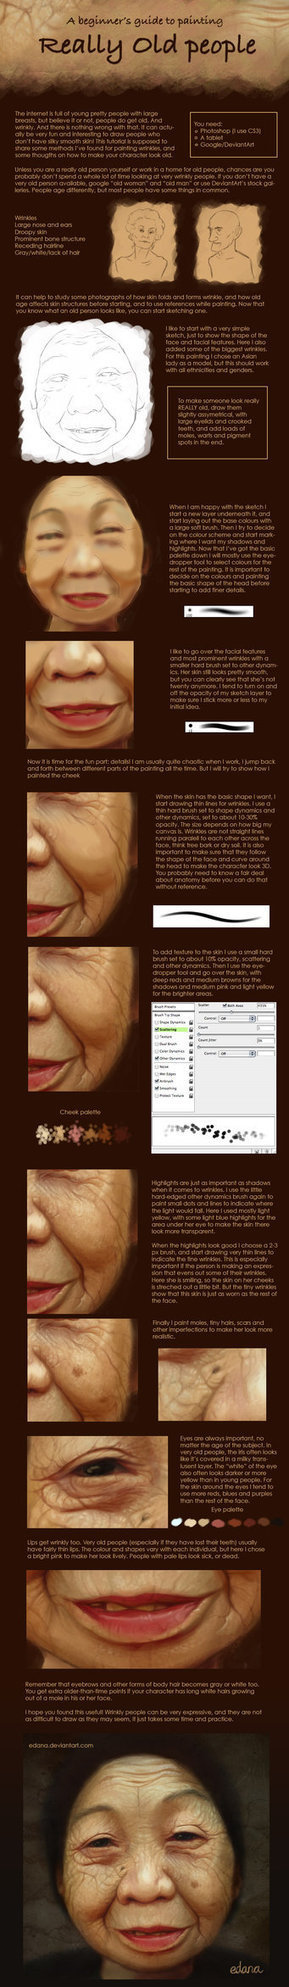 Painting Really Old People | Drawing References and Resources | Scoop.it